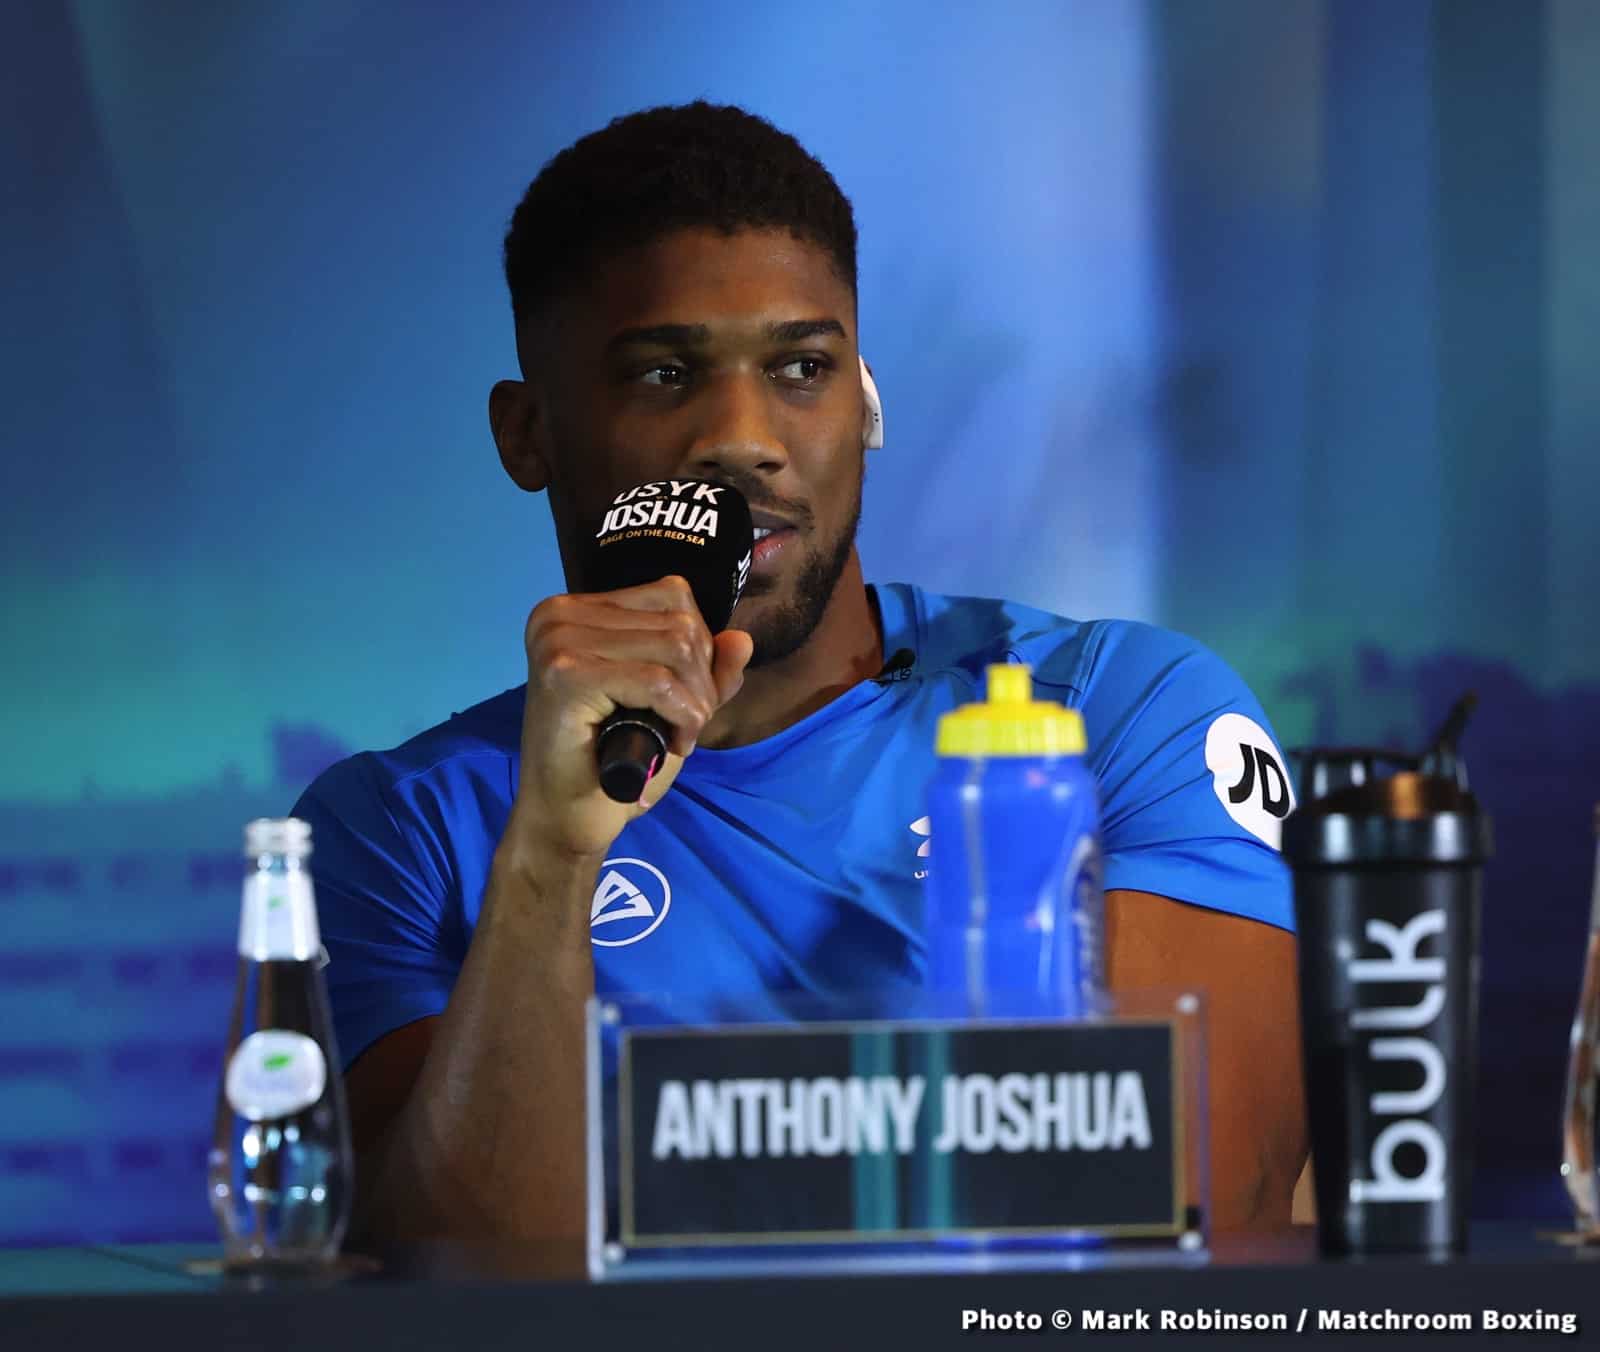 Anthony Joshua: "I can bring Tyson Fury out of retirement 100%"